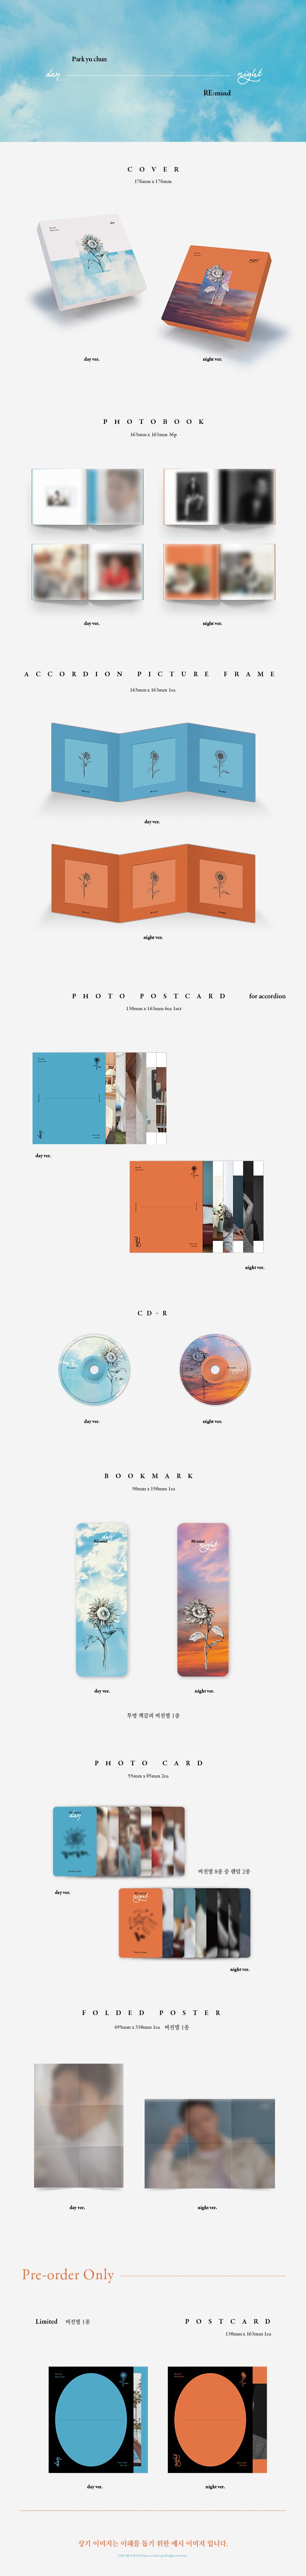 1 CD
1 Poster 
1 Photo Book (36 pages)
1 Accordion Picture Frame
6 Photo Postcards
1 Bookmark
2 Photo Cards